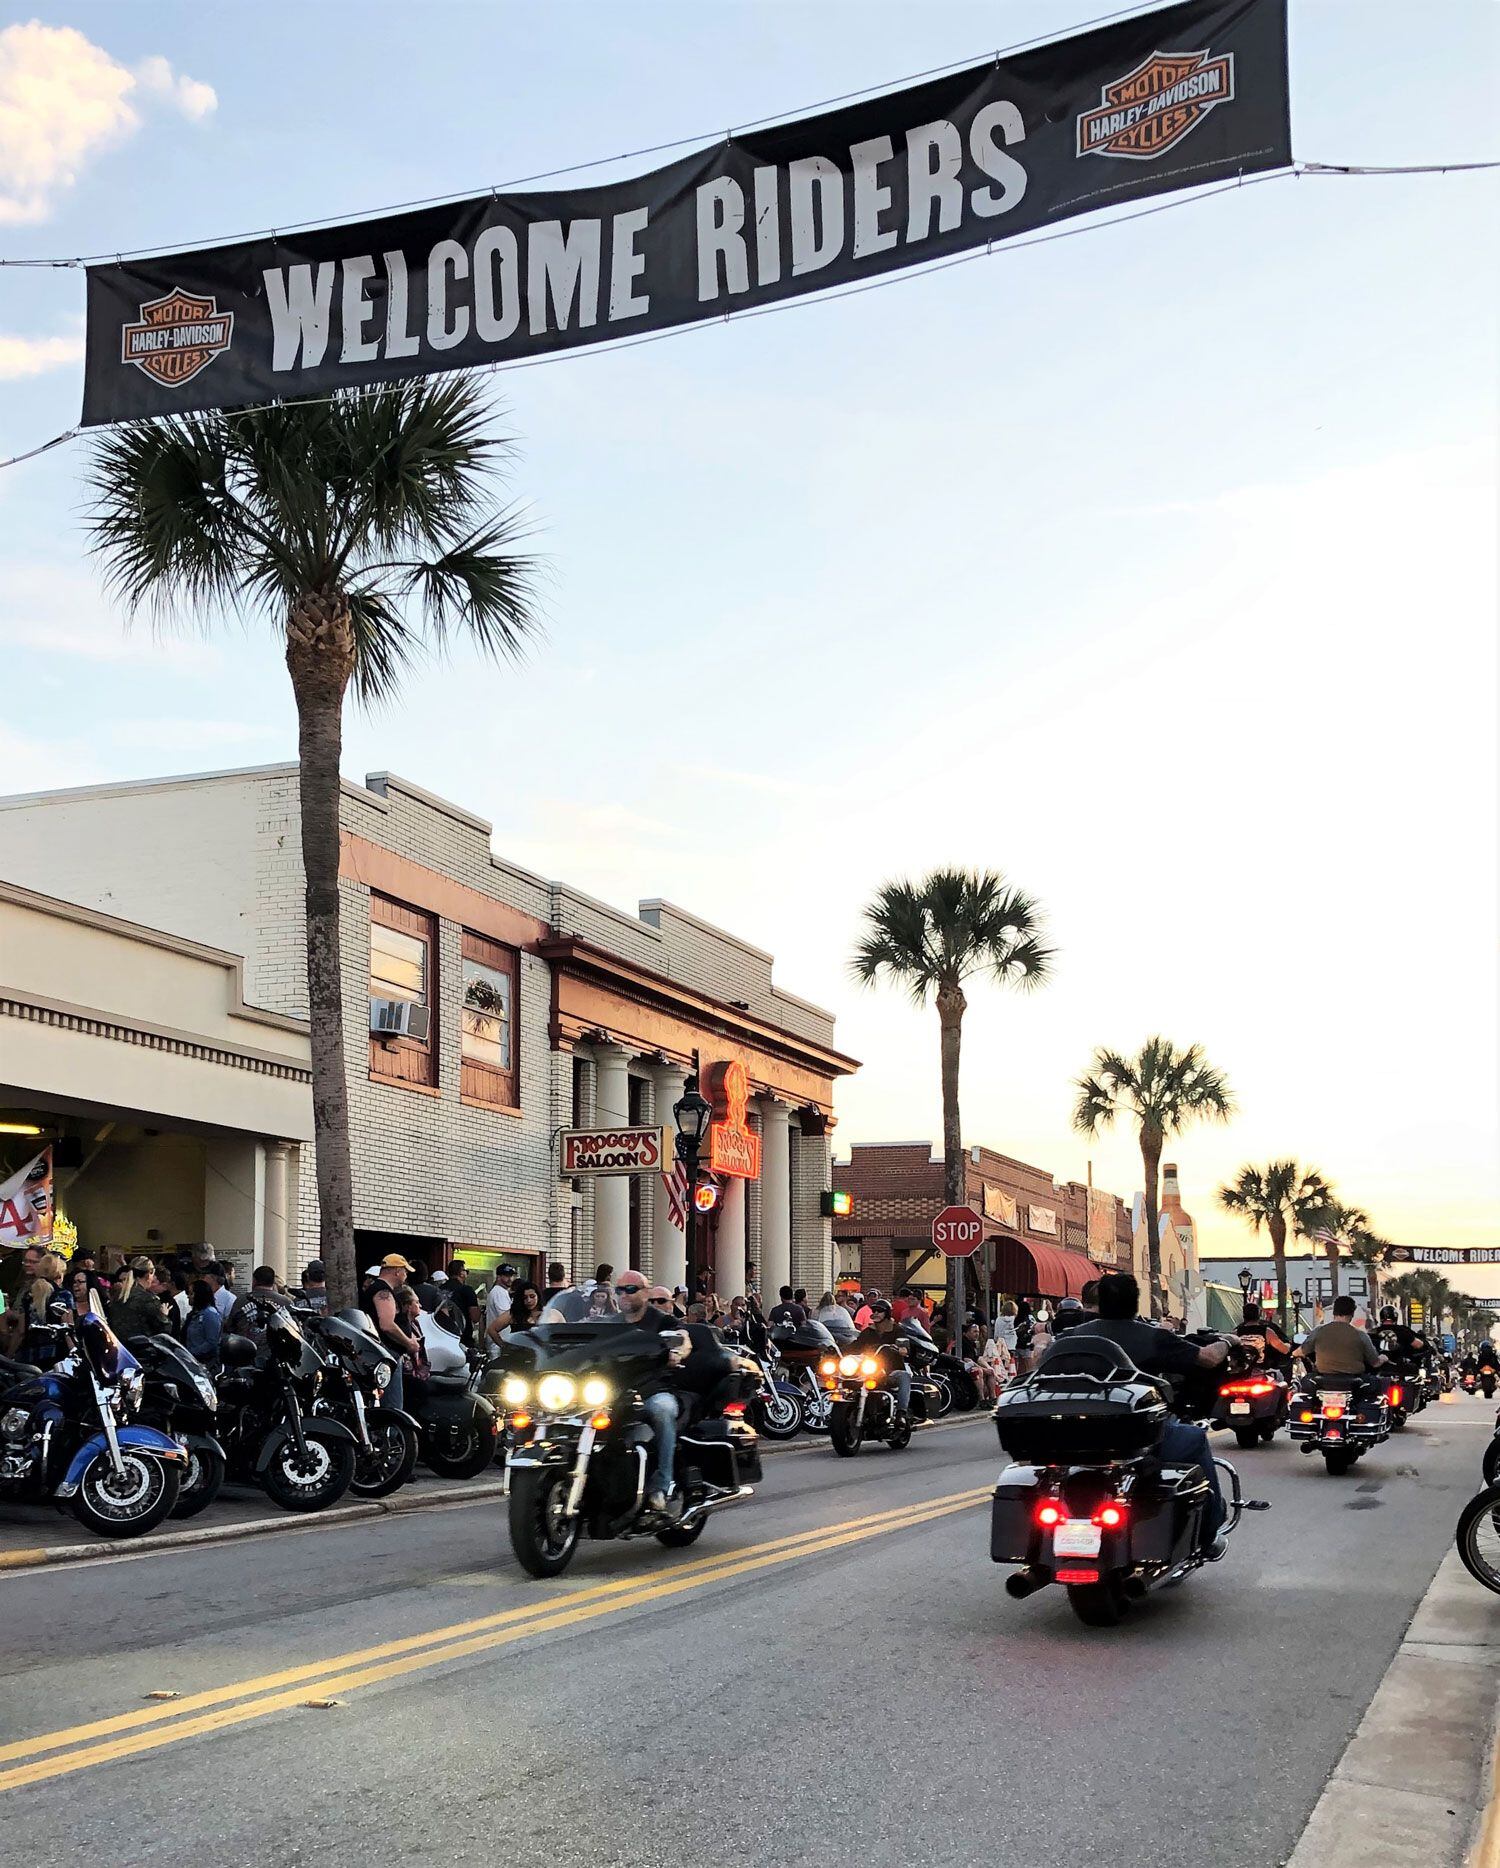 The pieces are slowly falling into place for Daytona Bike Week to roll out its 80th anniversary in 2021.